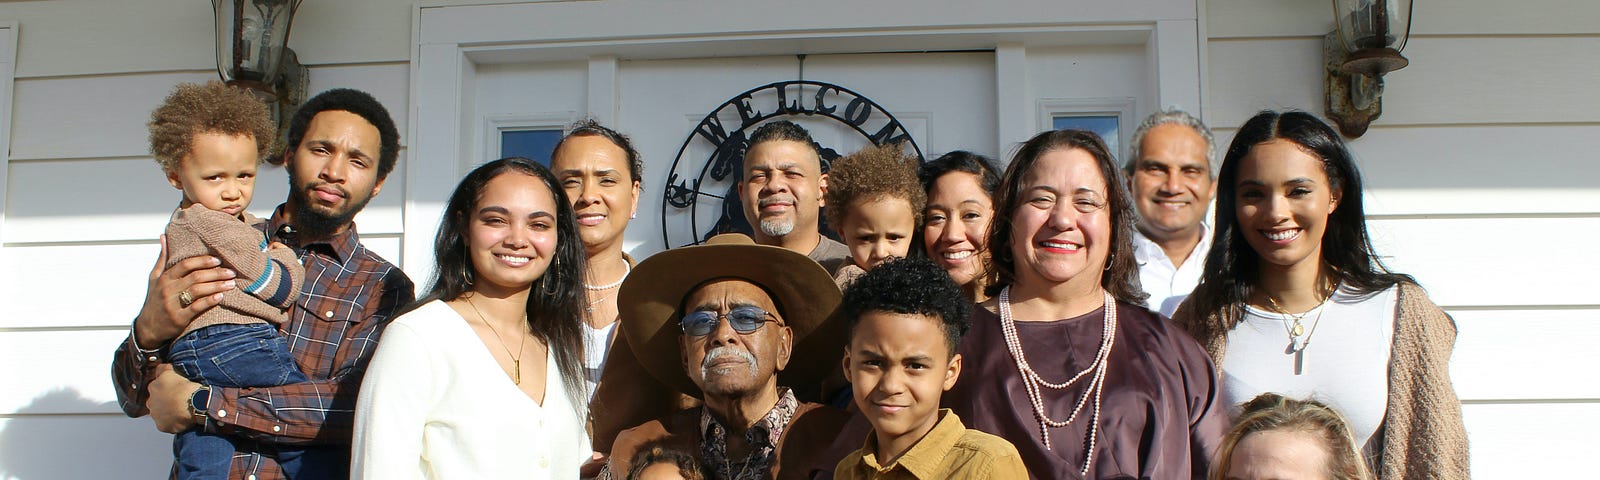 Portrait of an intergenerational family standing in front of the door of a house smiling in a pose of togetherness